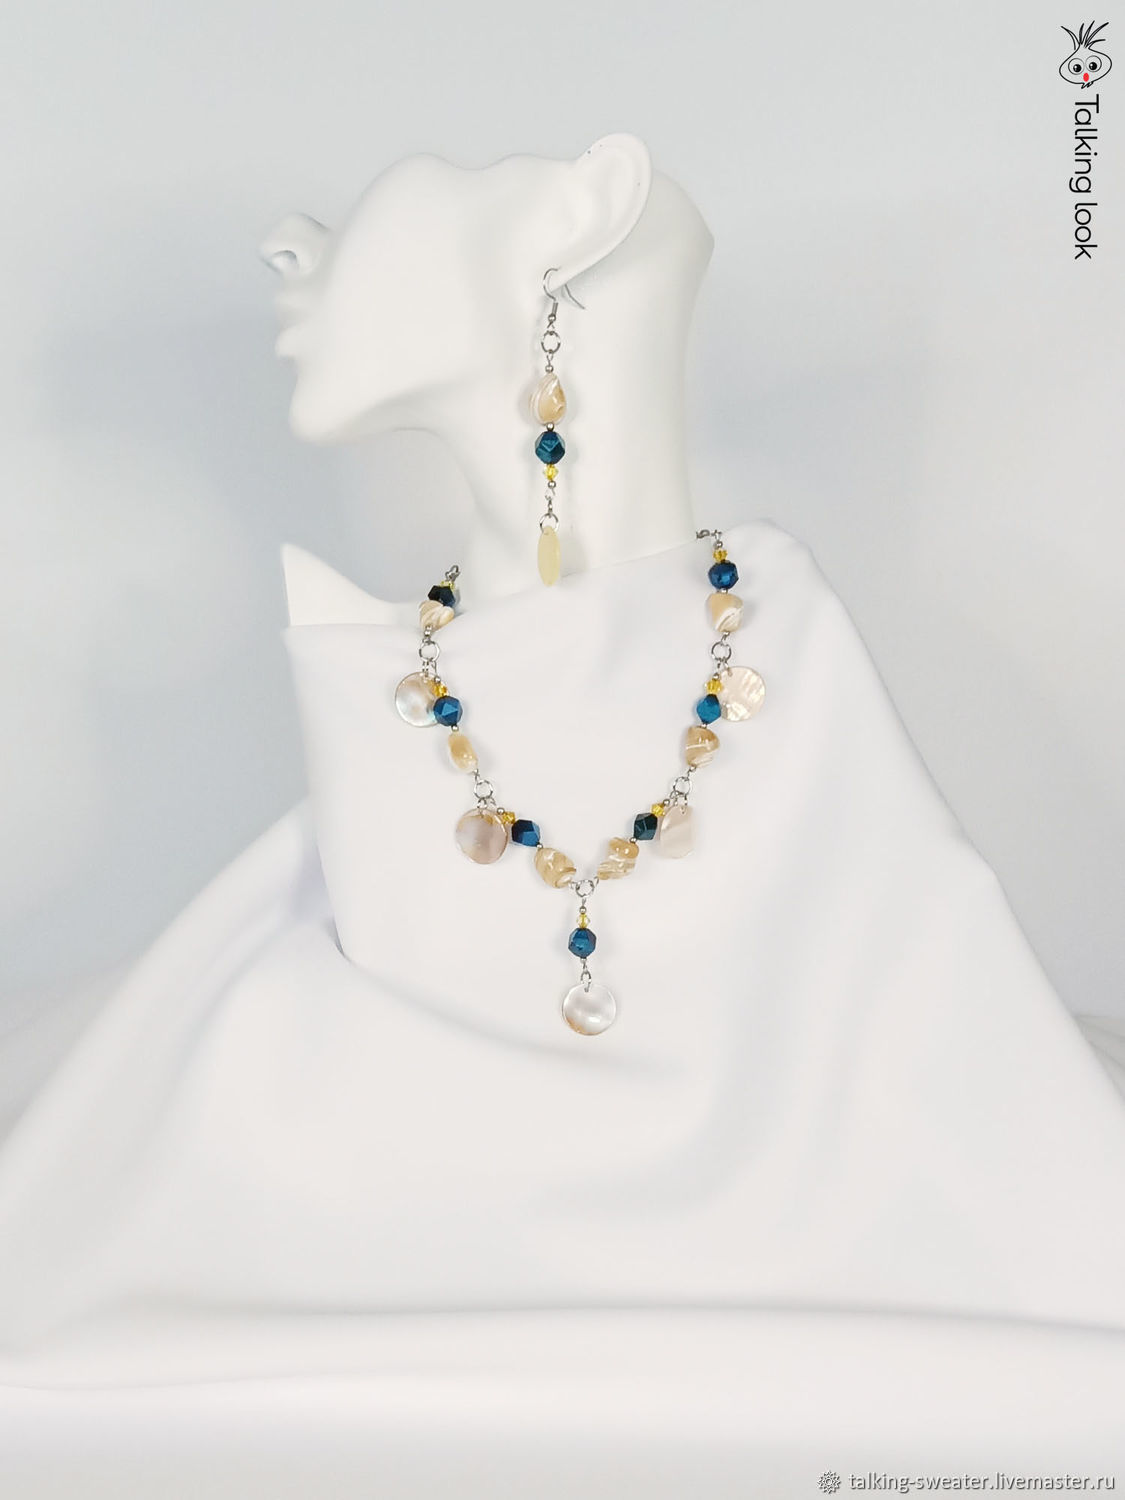 Necklace and earrings with tiger eye and Swarovski crystals, Jewelry Sets, St. Petersburg,  Фото №1